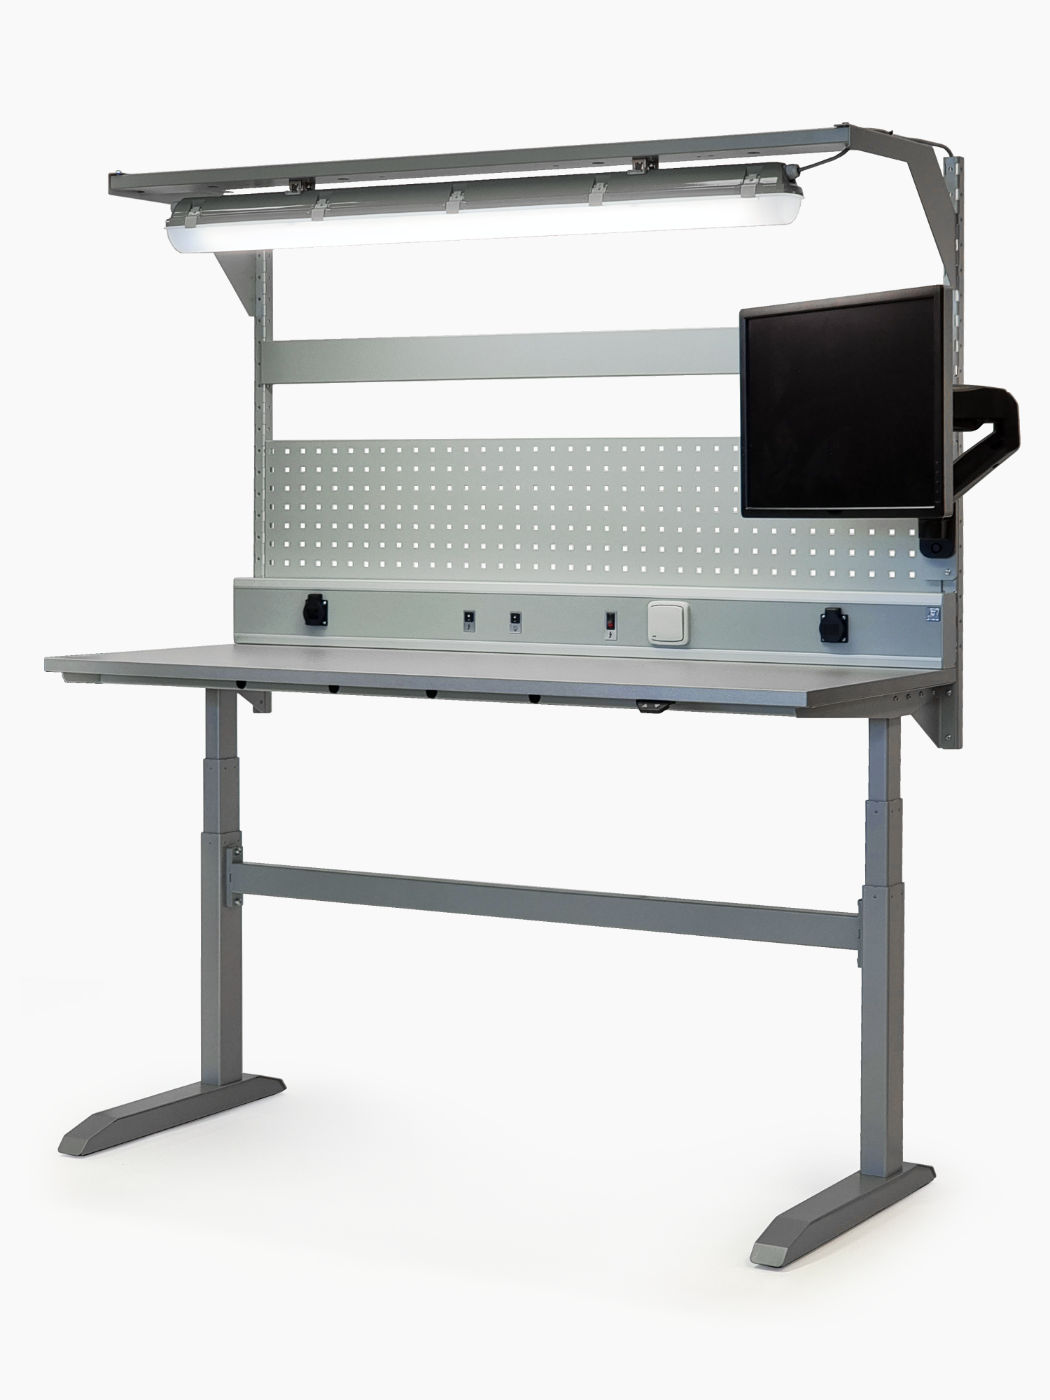 Electrically height adjustable table for ALNAK series assembly Operations